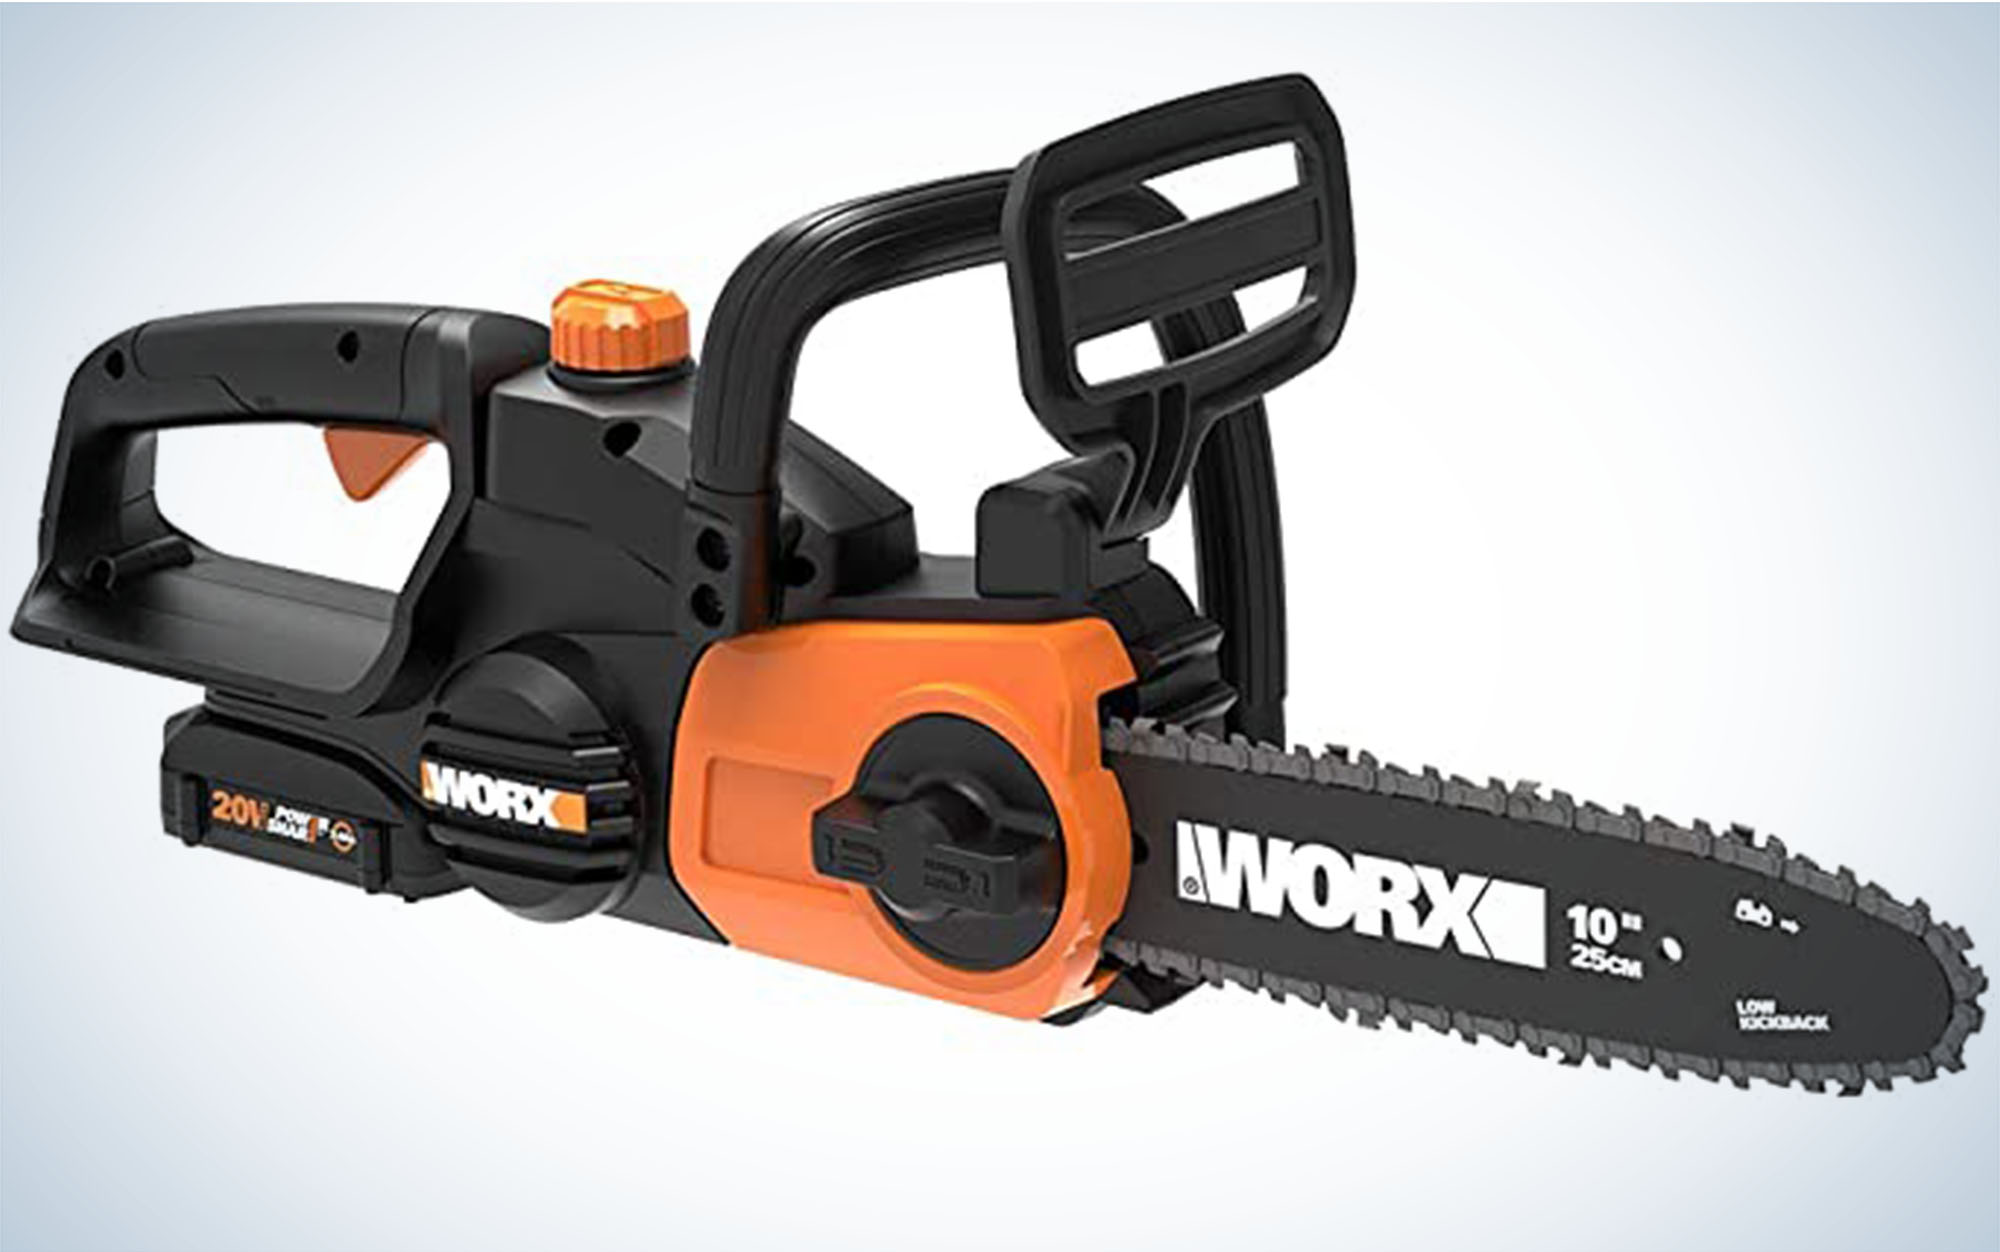 The Worx Power 20V Share is one of the best electric chainsaws.